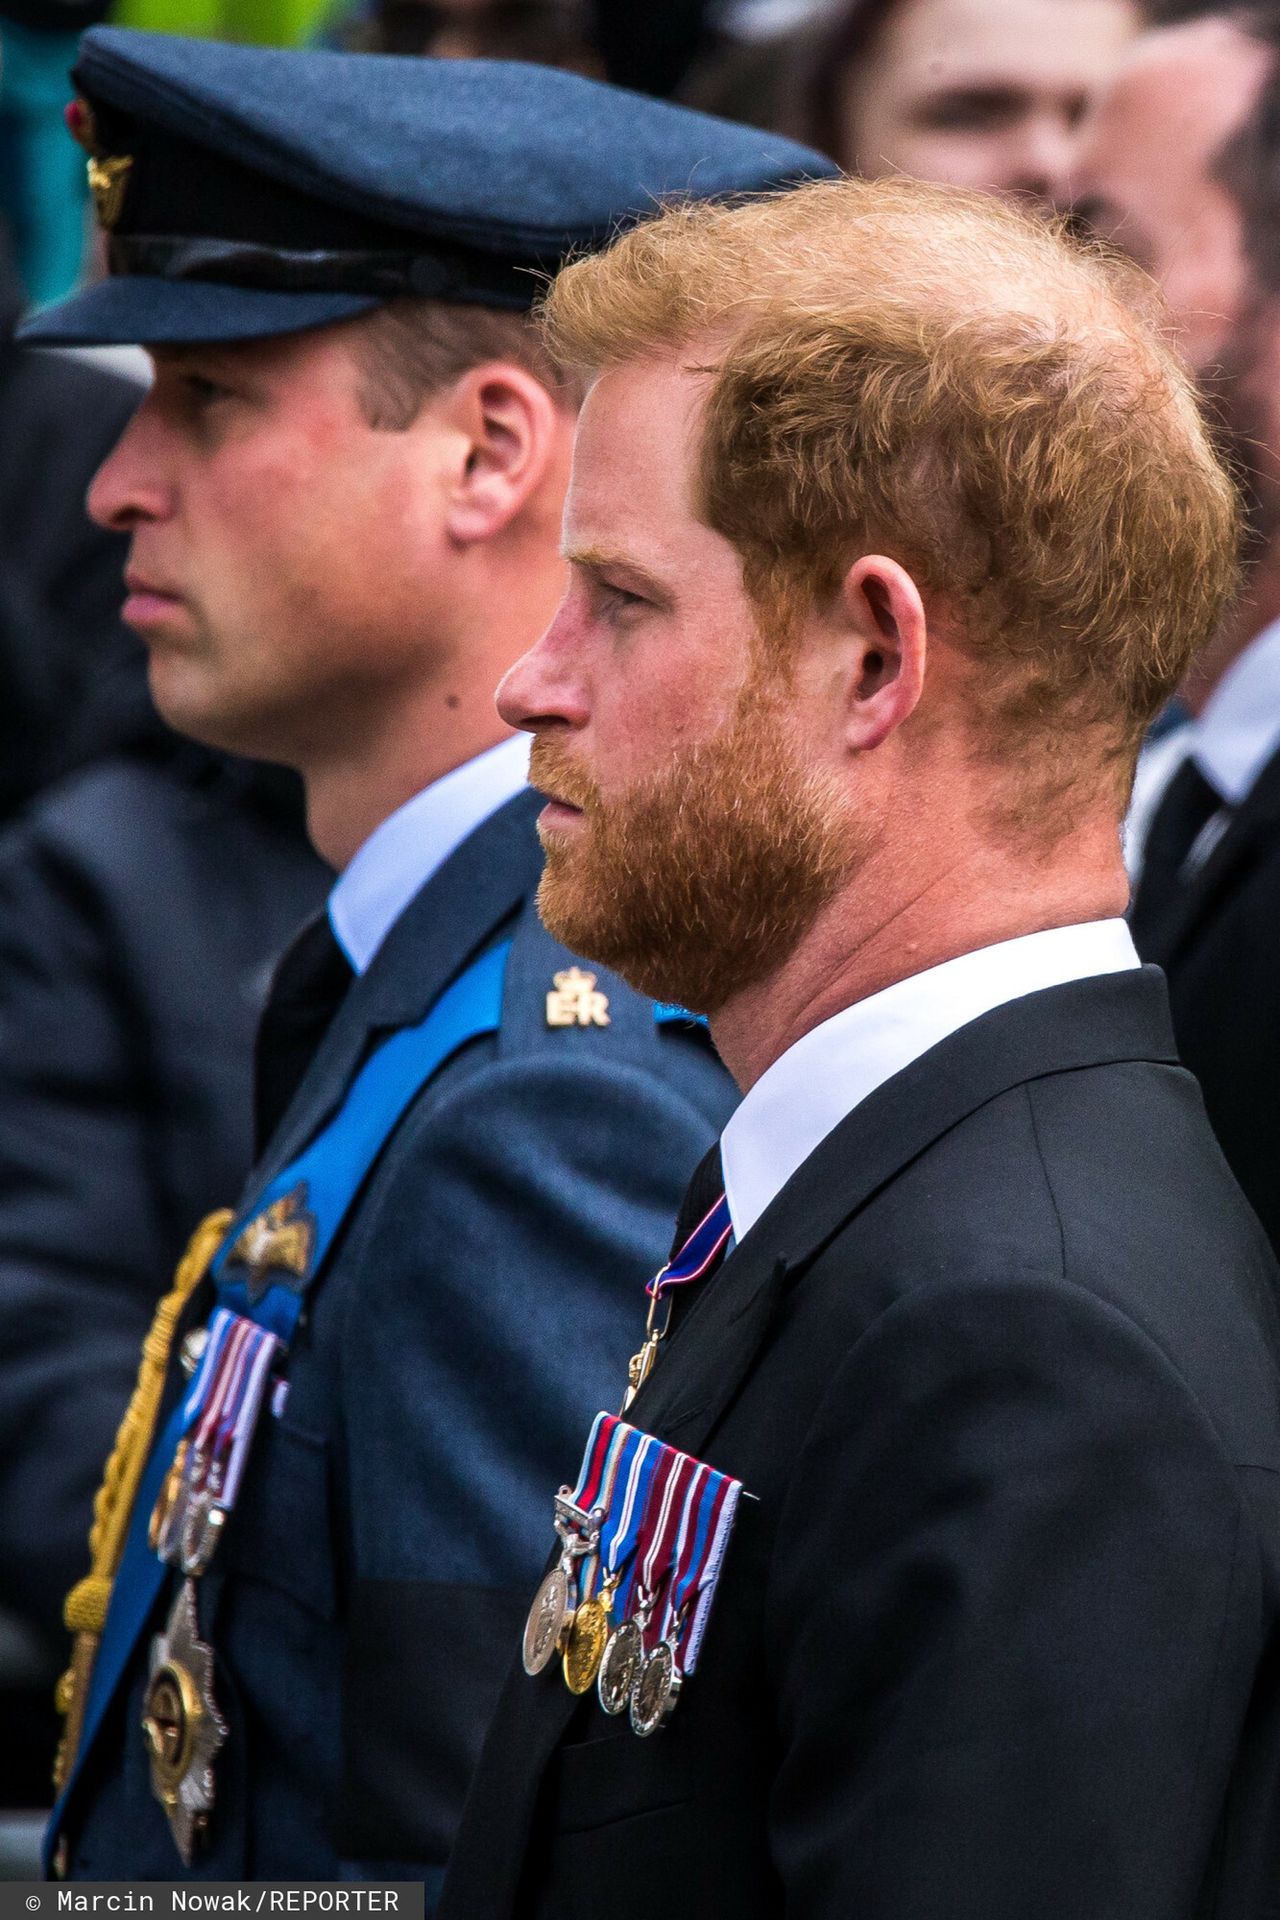 Prince Harry is THROWING A PUNCH AT THE KING'S NOSE? Experts assess: "It will be seen as a disregard for King Charles III."